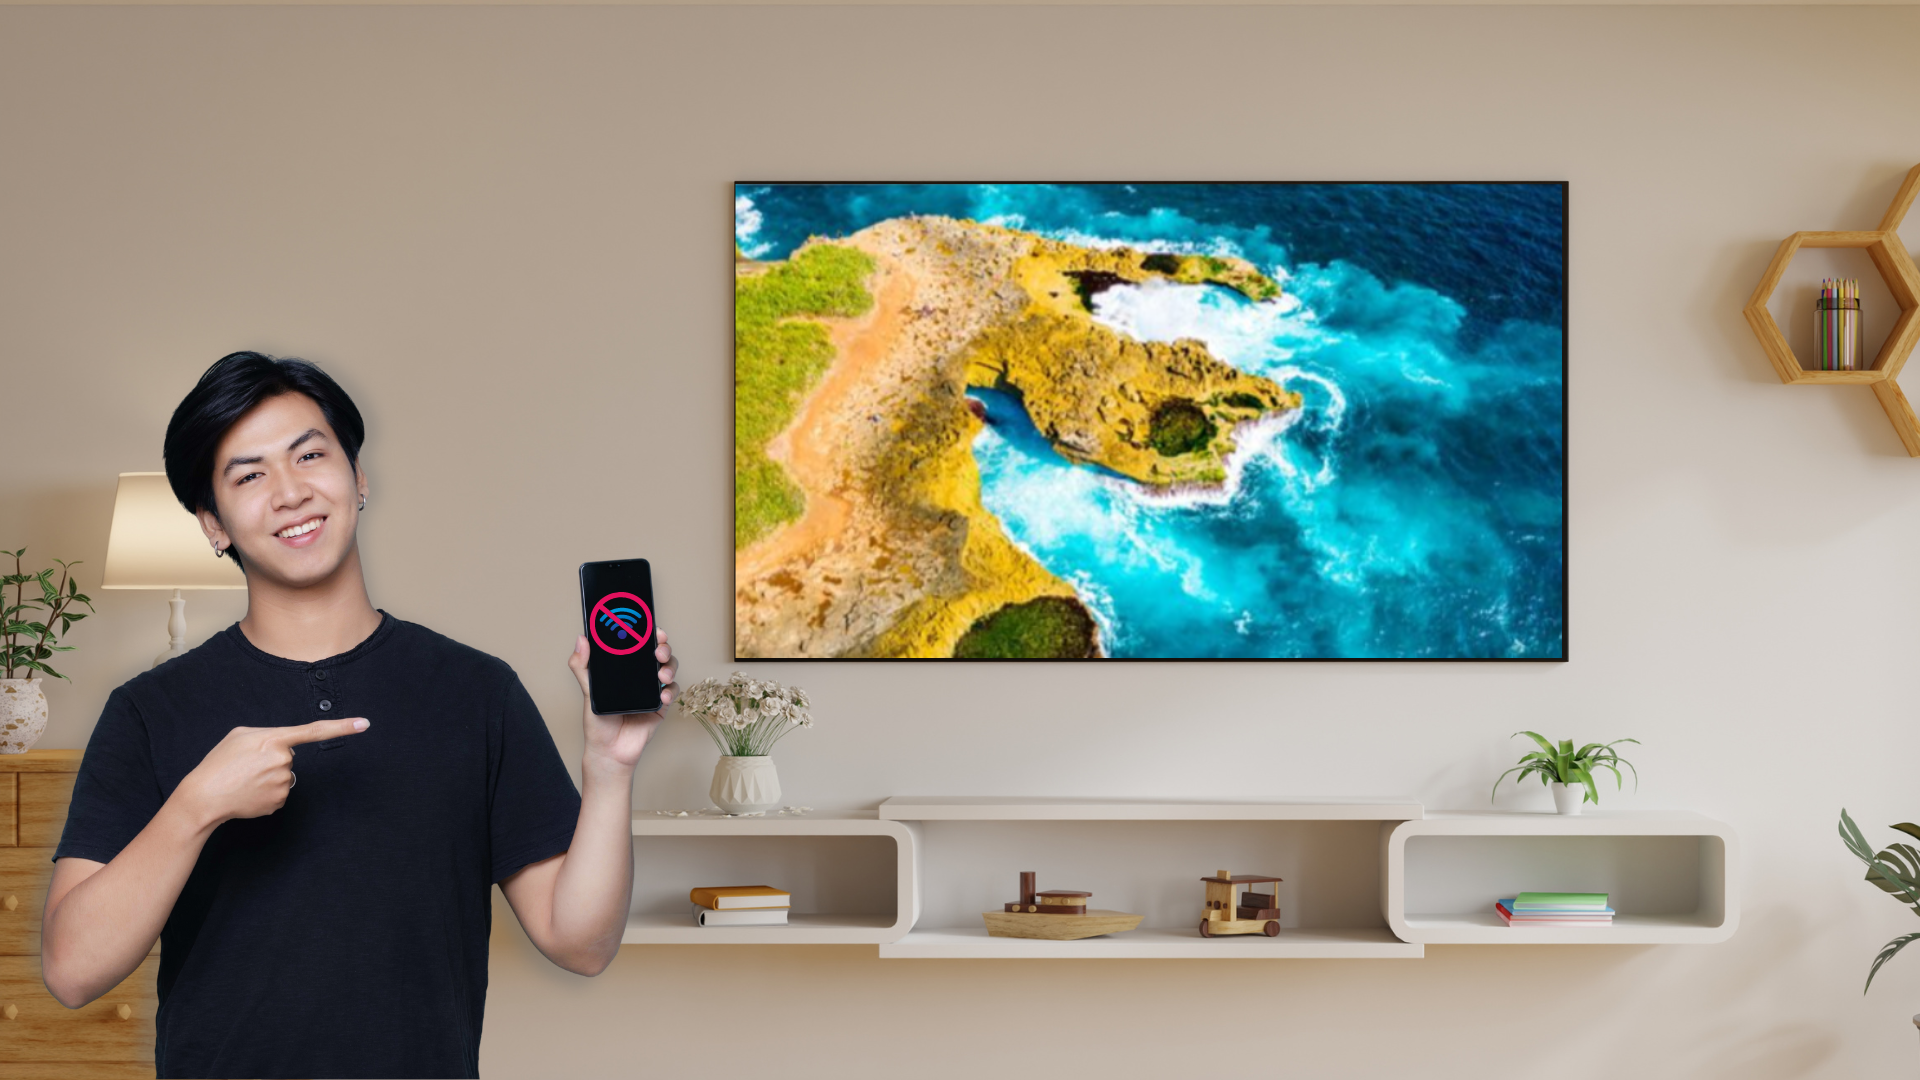 How to Connect Phone to Smart TV Without WiFi